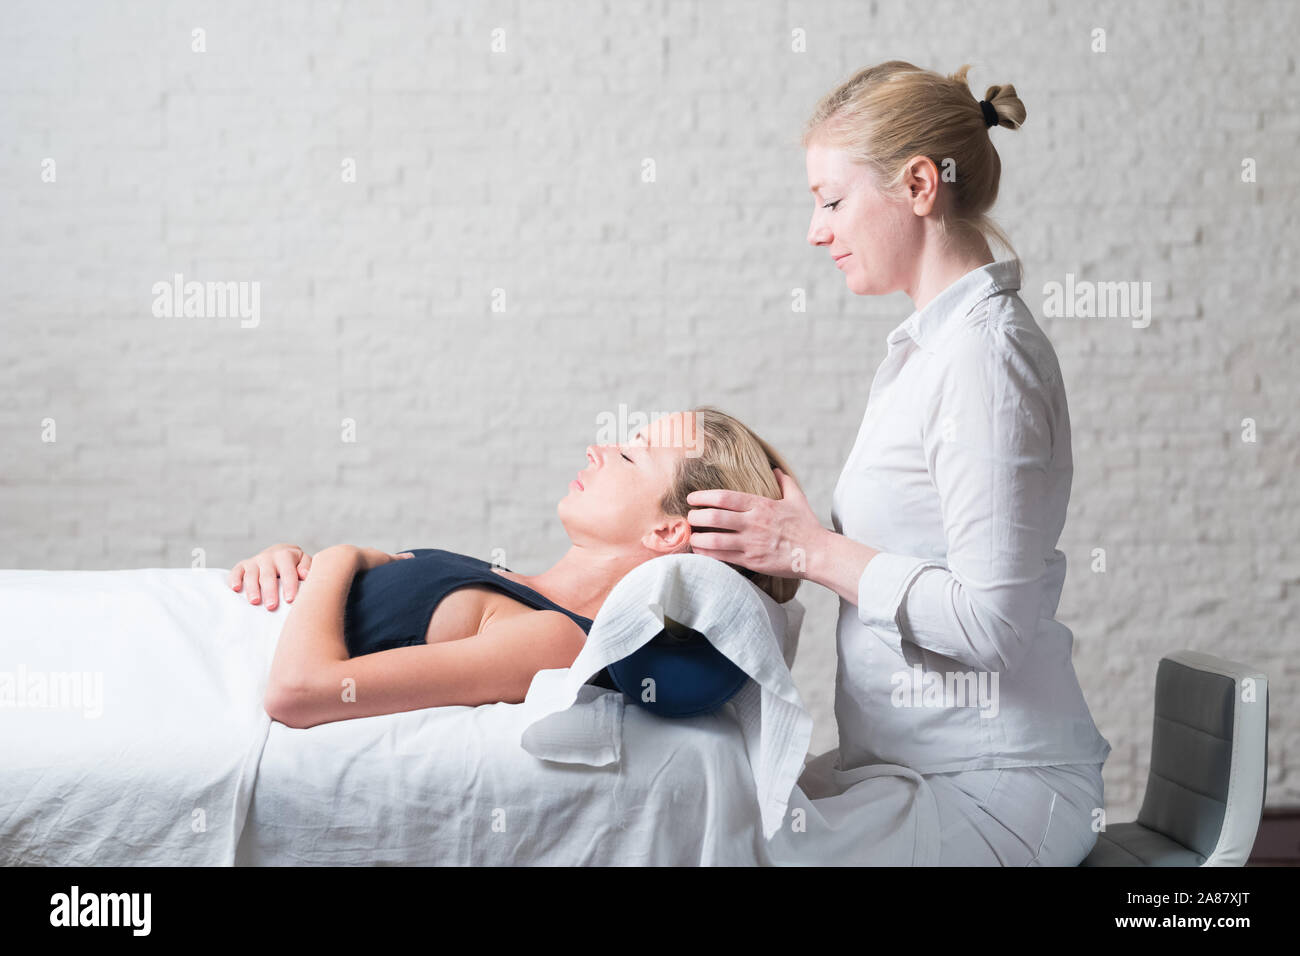 Professional female masseur giving relaxing massage treatment to young female client. Hands of masseuse on forehead of young lady during procedure of Stock Photo